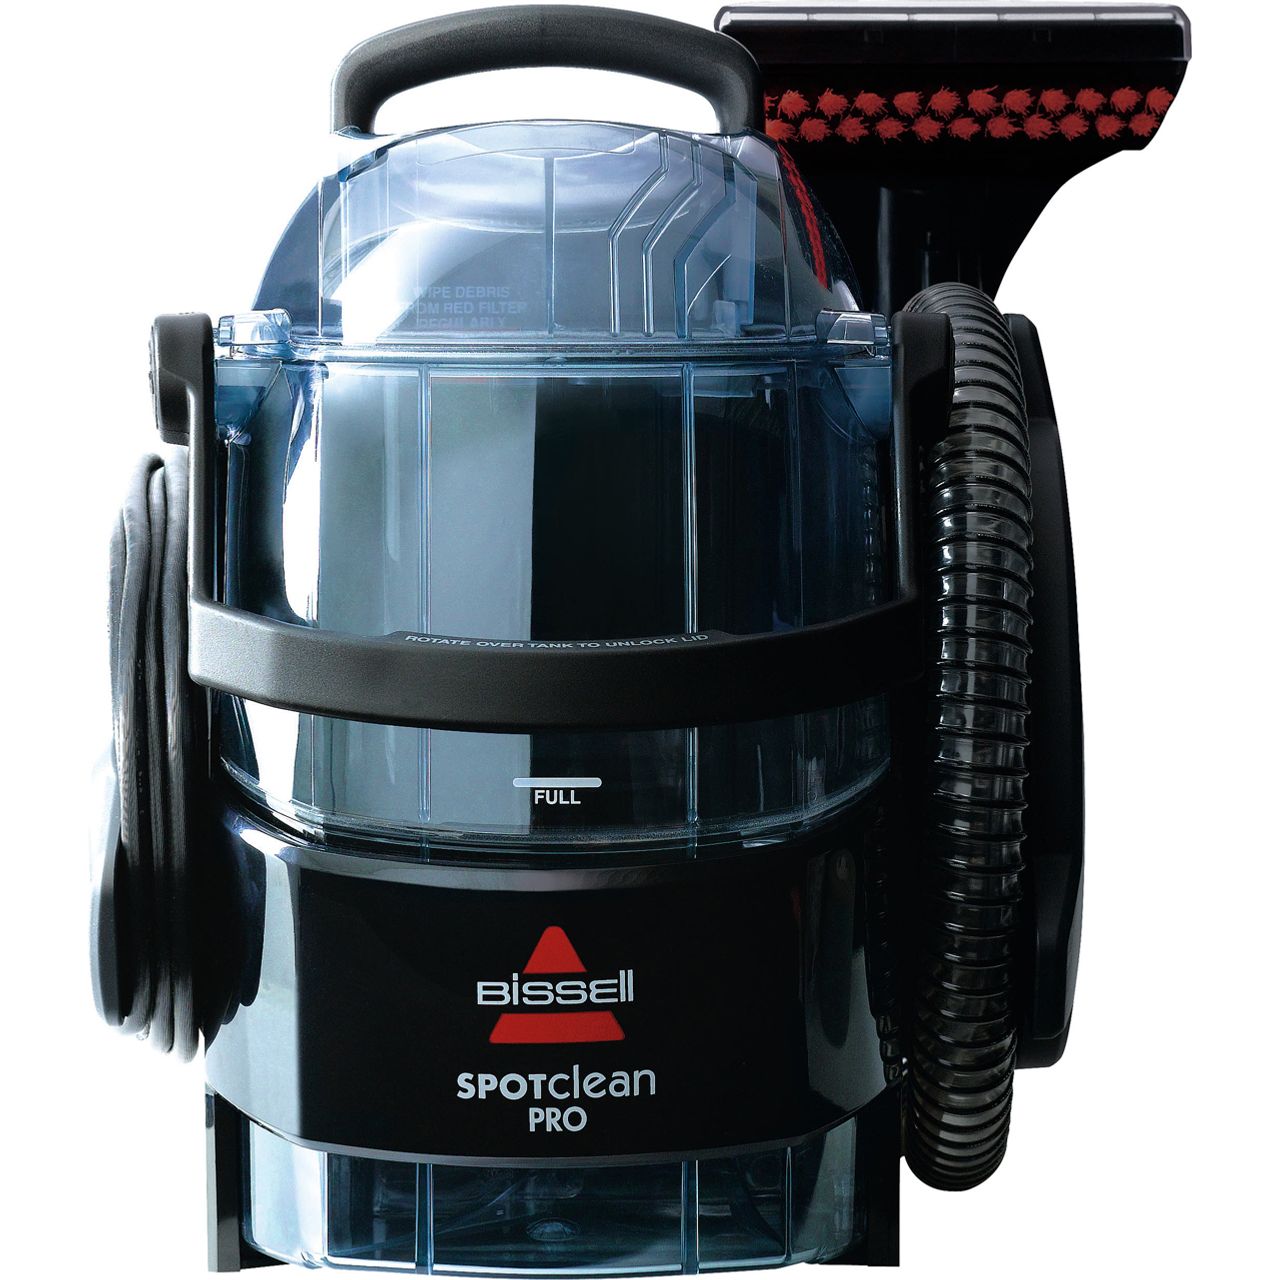 Bissell SpotClean Pro 1558E Carpet Cleaner Review